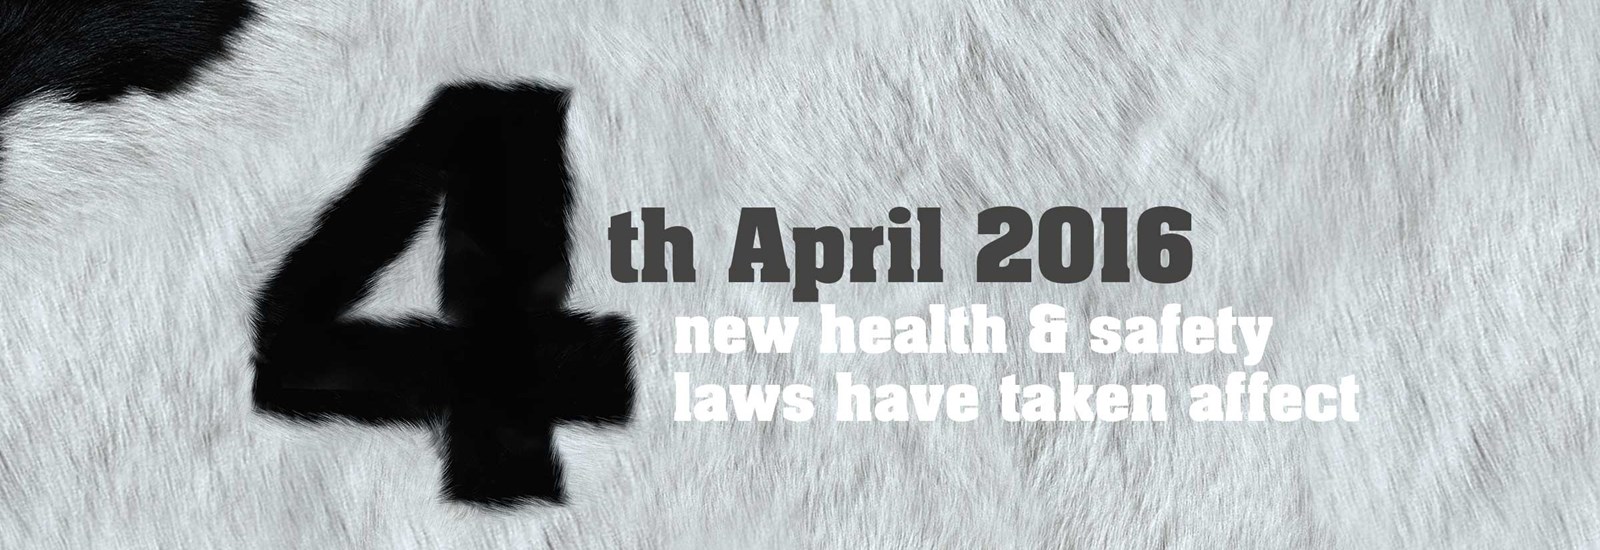 4th April 2016 new health and safety laws taking effect